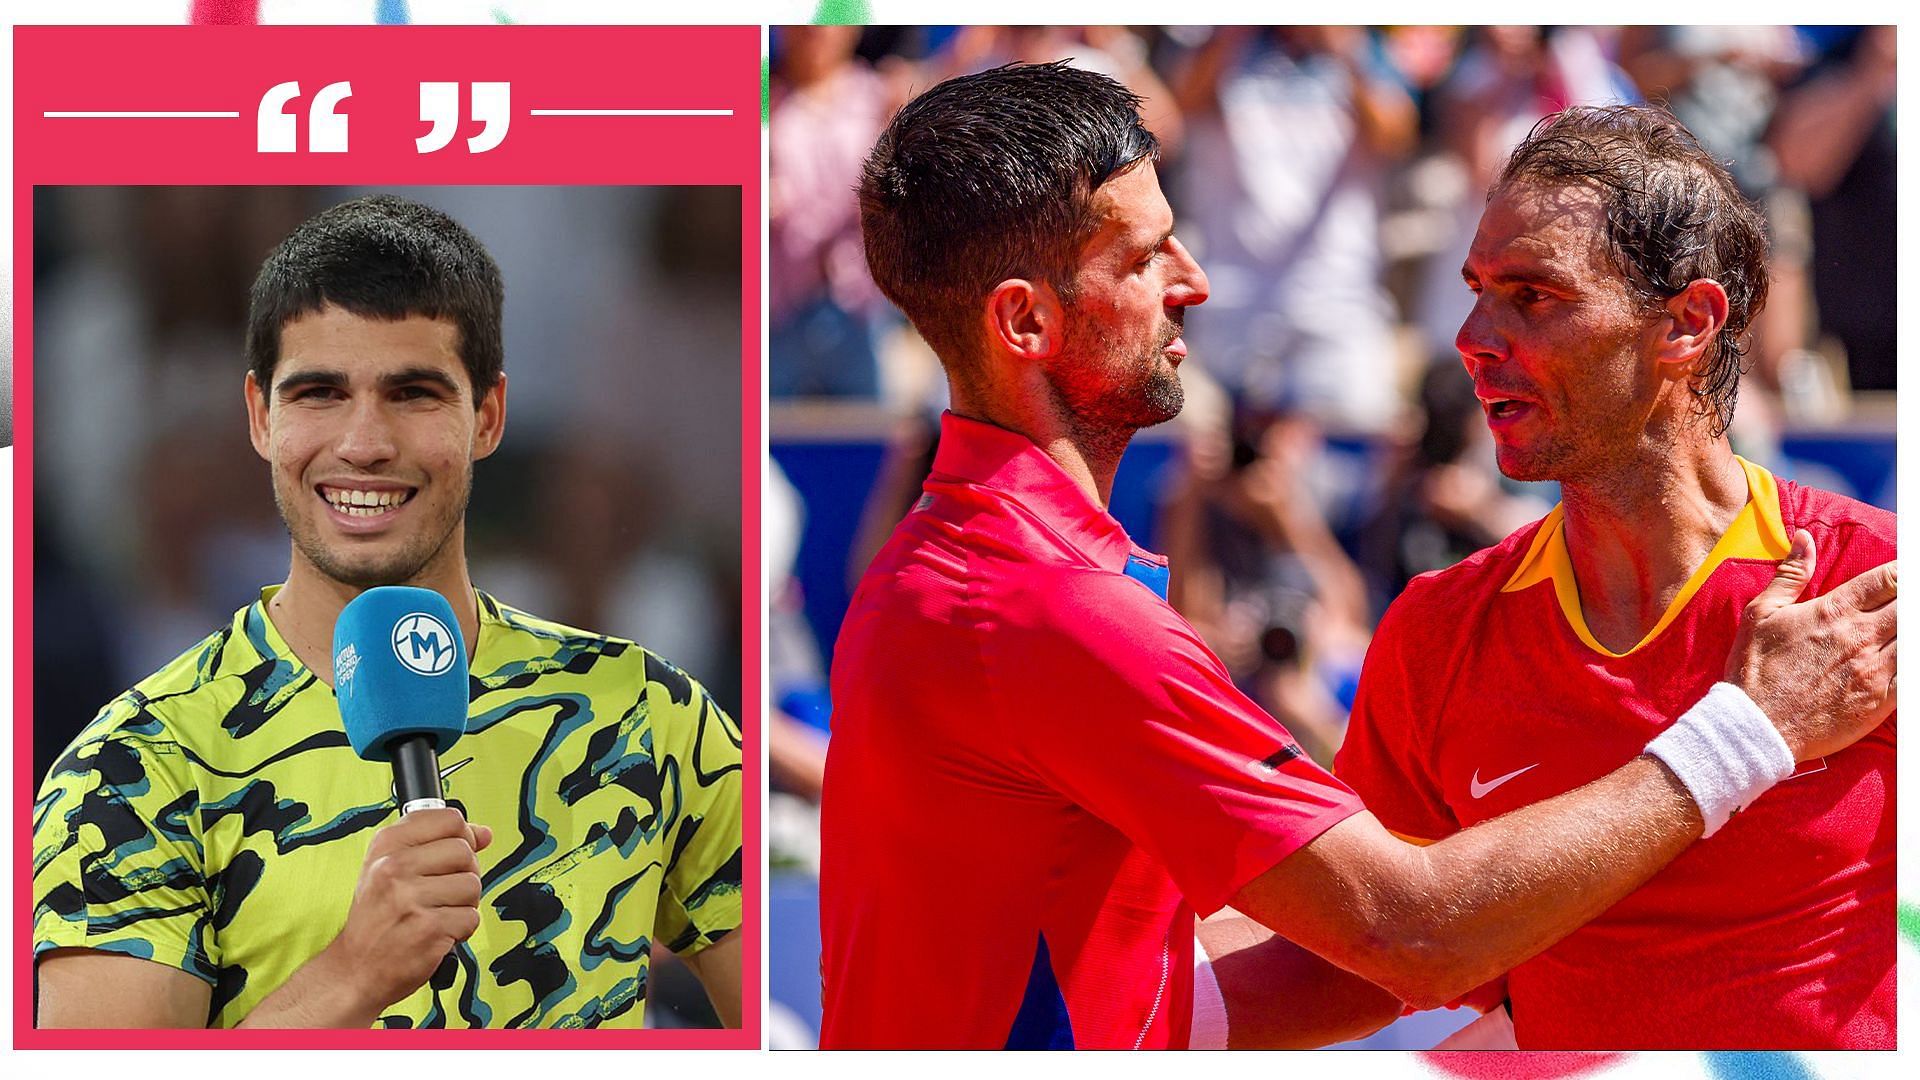 “When Novak Djokovic is playing at this level it's really difficult” – Carlos Alcaraz praises Serb for win over Rafael Nadal at Paris Olympics 2024